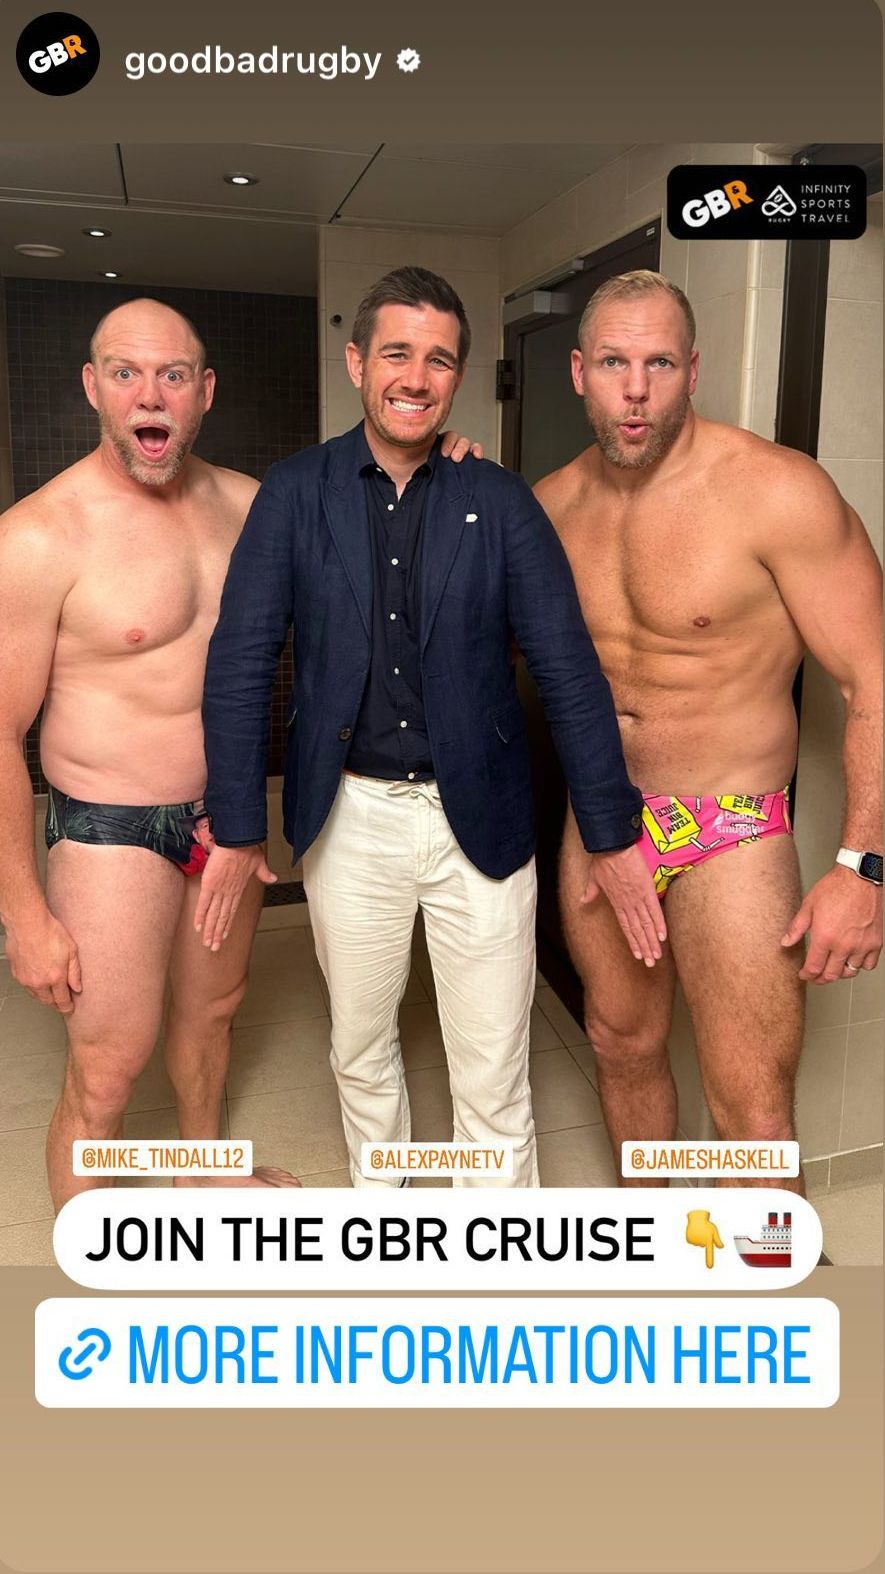 Mike Tindall and James Haskell wearing budgie smugglers